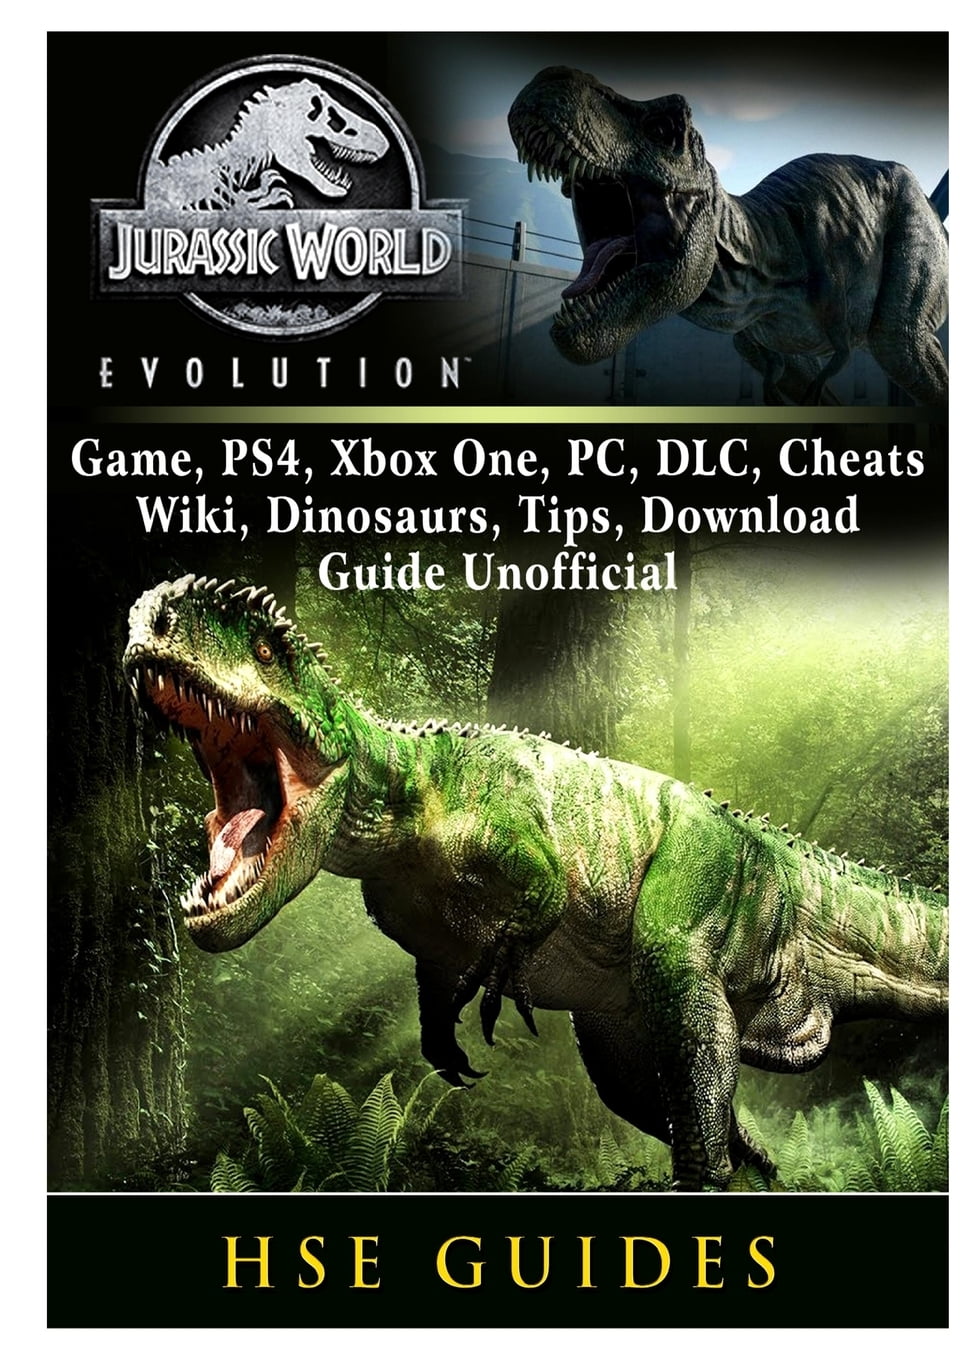 Jurassic World Evolution Game Ps4 Xbox One Pc Dlc Cheats Wiki Dinosaurs Tips Download Guide Unofficial Paperback Walmart Com